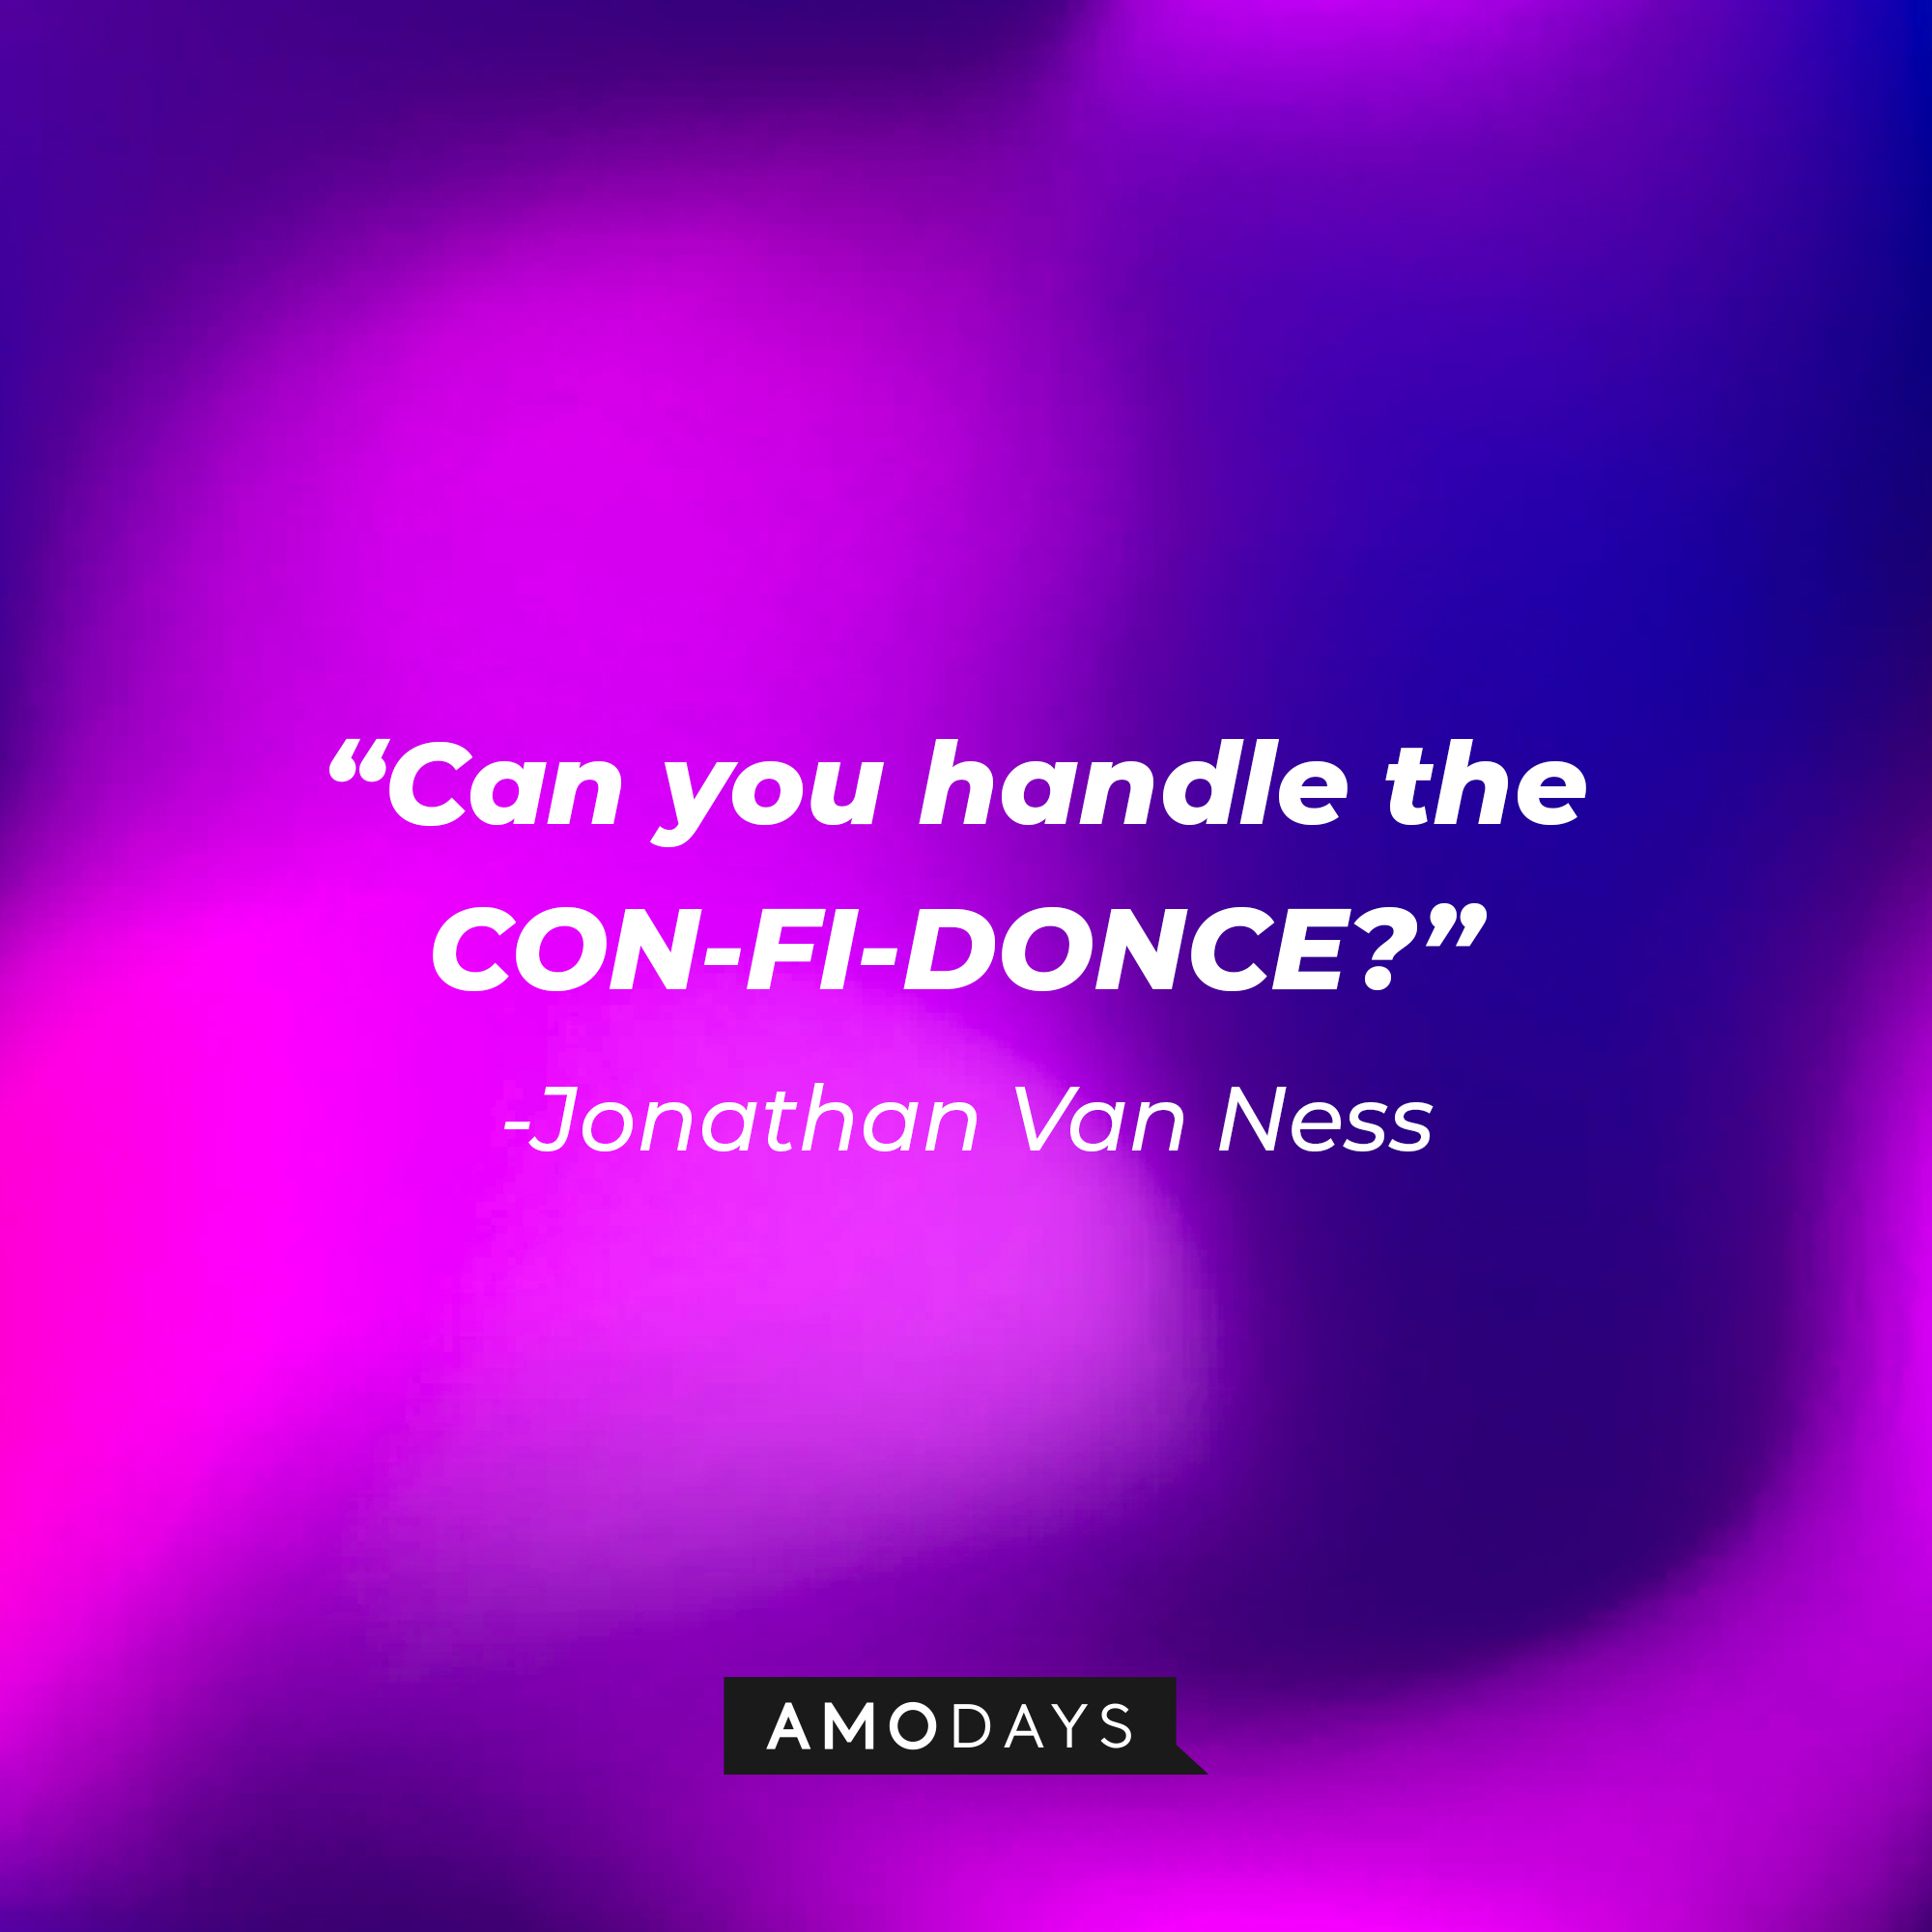 “Can you handle the CON-FI-DONCE?” | Image: AmoDays